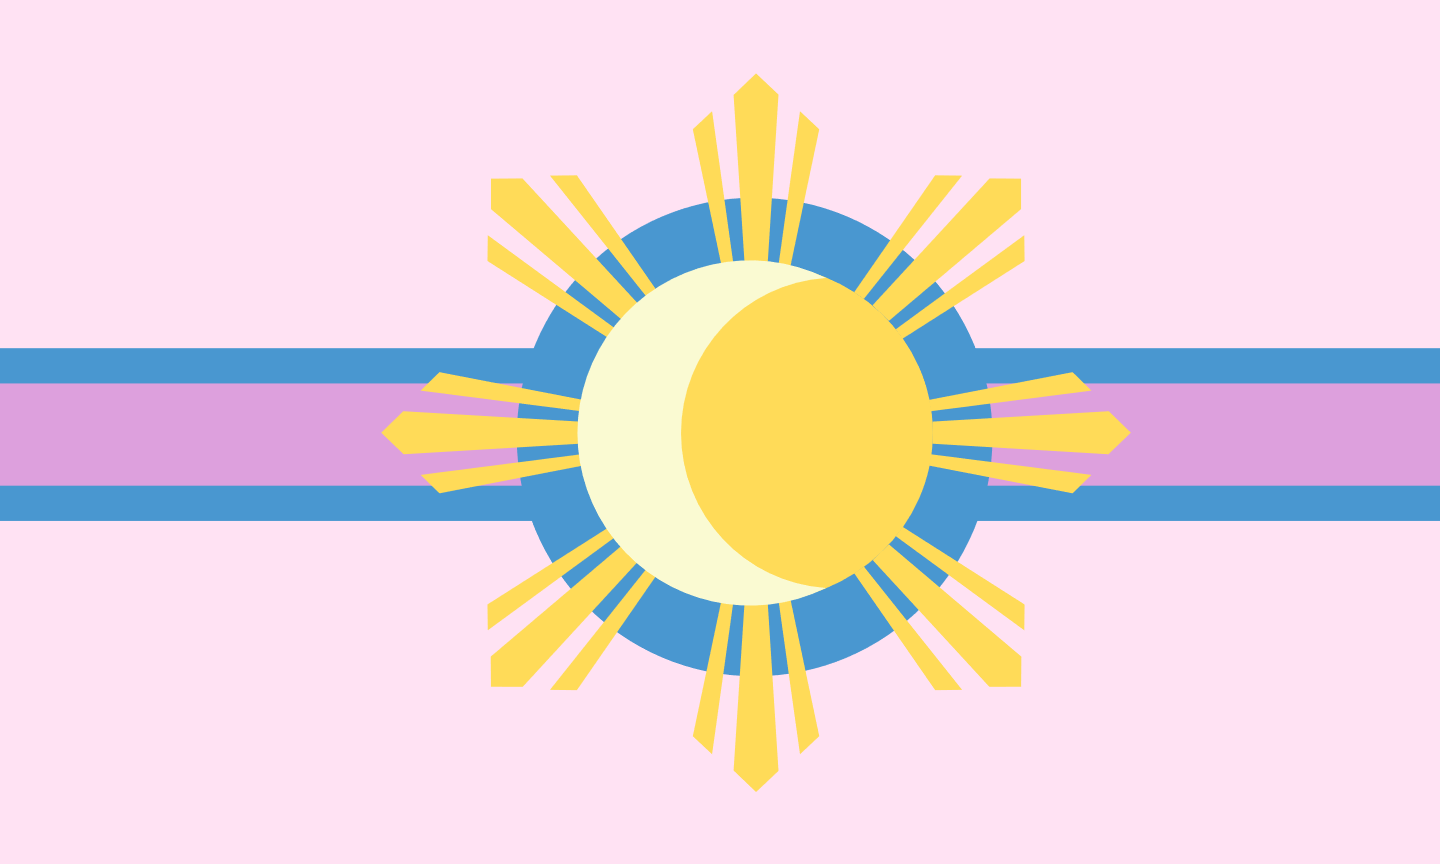 A light pink flag with a dark pink stripe running horizontally in the center. The stripe is bordered on the top and bottom by a blue line. Centered in the flag is a blue circle with a stylized golden sun, which contains the 